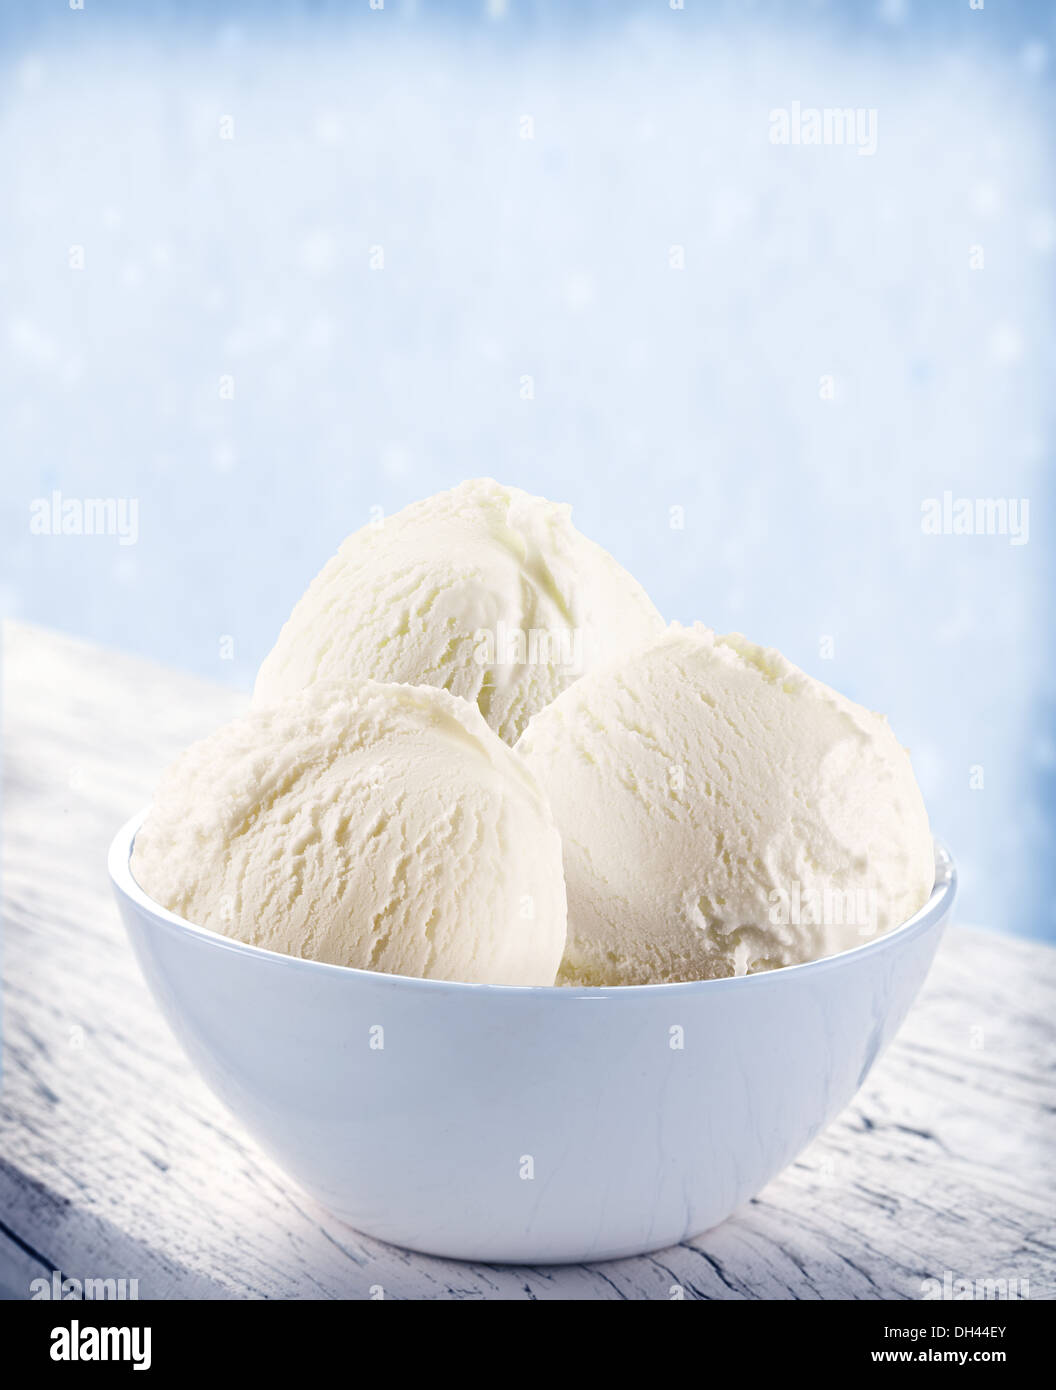 https://c8.alamy.com/comp/DH44EY/vanilla-ice-cream-scoops-in-white-cup-over-snow-background-DH44EY.jpg